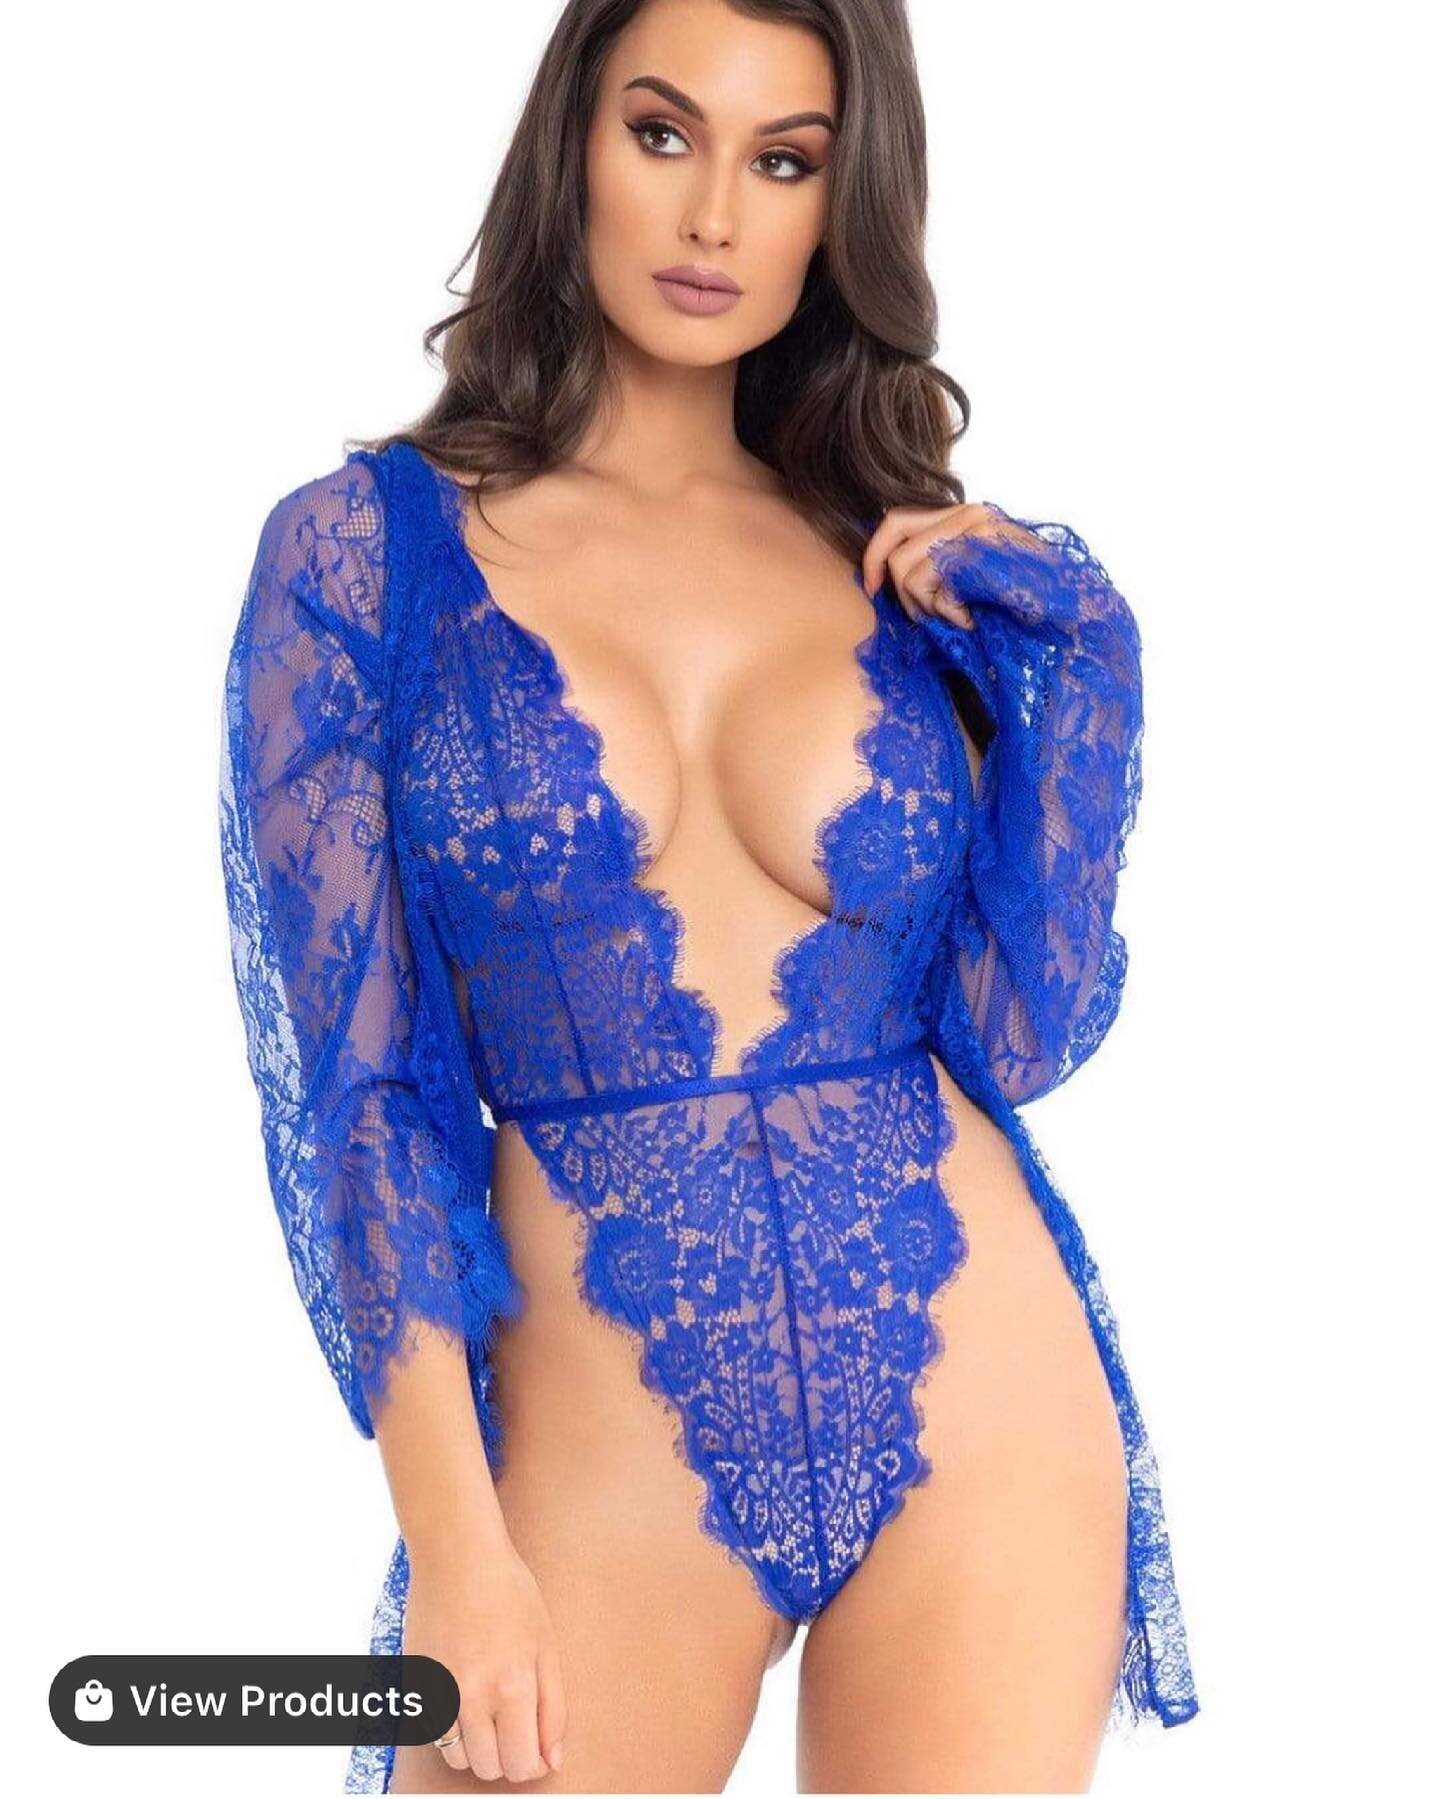 Tap for more info &amp; to purchase 
Use discount code for 20% off at checkout 
&ldquo;SAVE20&rdquo;

BODYSUITS/TEDDY  3pc Lace Teddy and Robe Set - Royal Blue - Small

WWW.JUICYSINS.COM